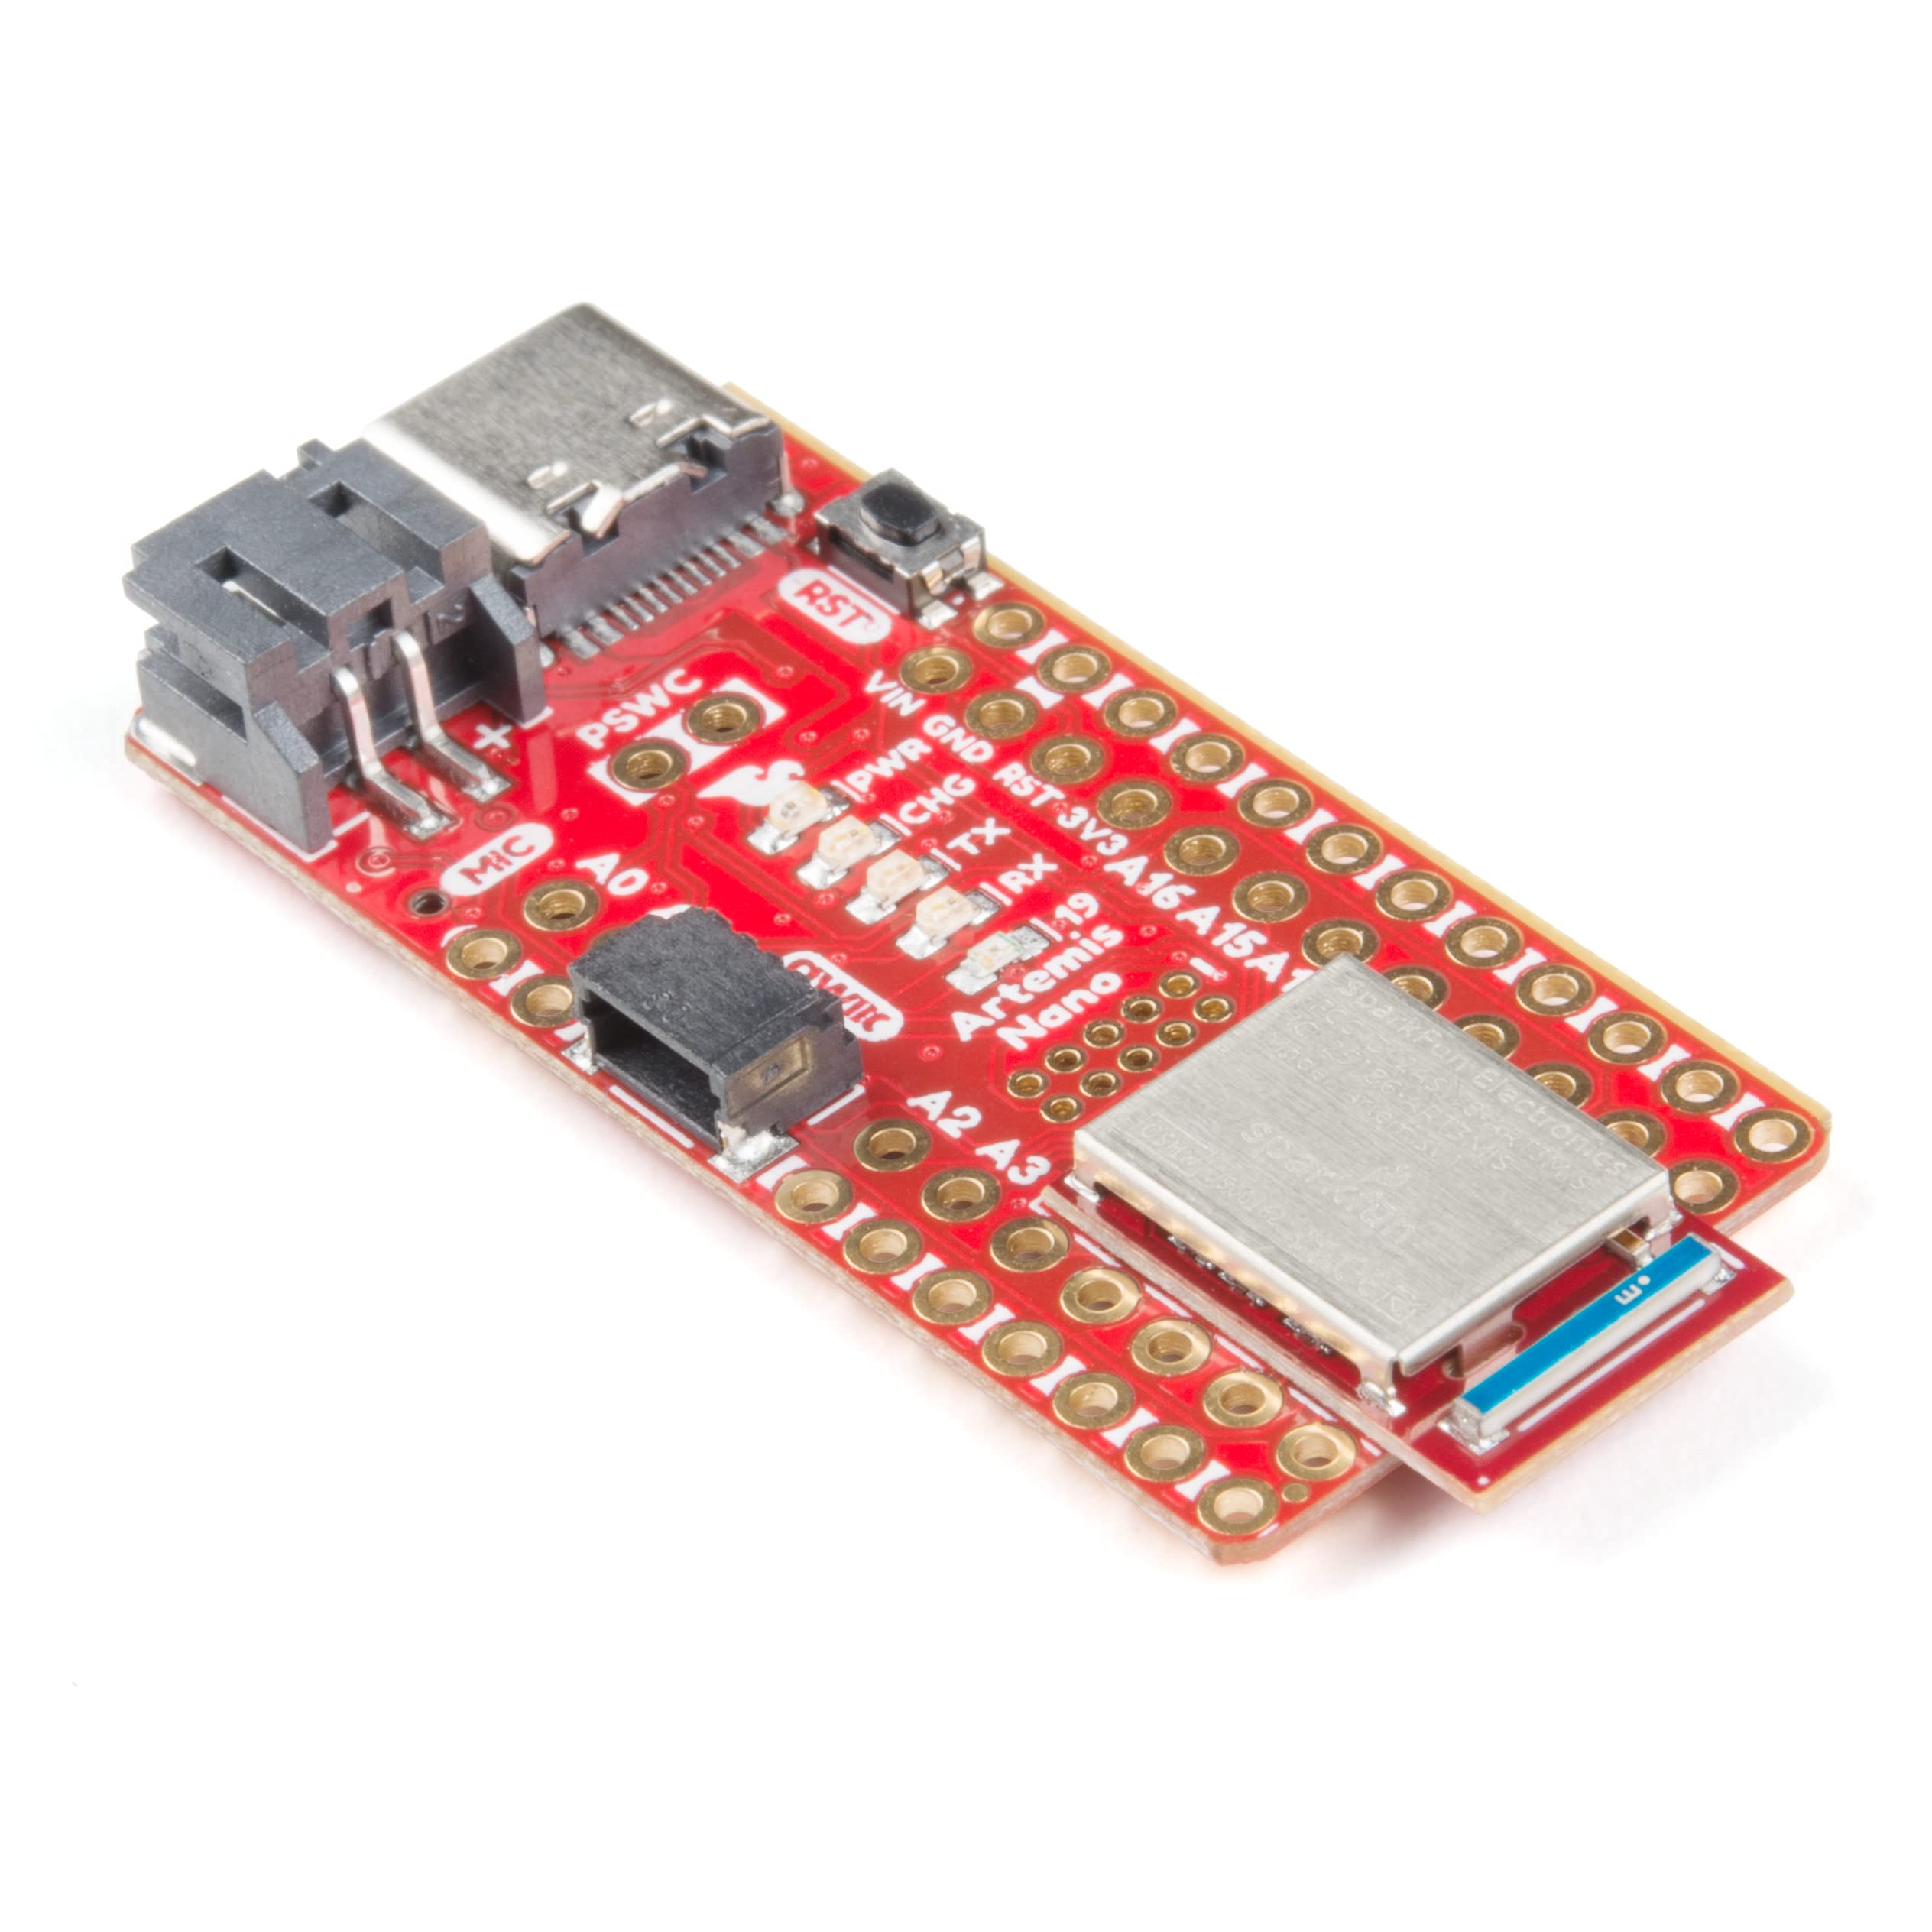 SparkFun RedBoard Artemis Nano Machine Learning Development Board Includes BLE 1 megabyte of Flash USB-C Qwiic I2C MEMS Microphone Compatible with Arduino IDE TenserFlow Models Small Footprint